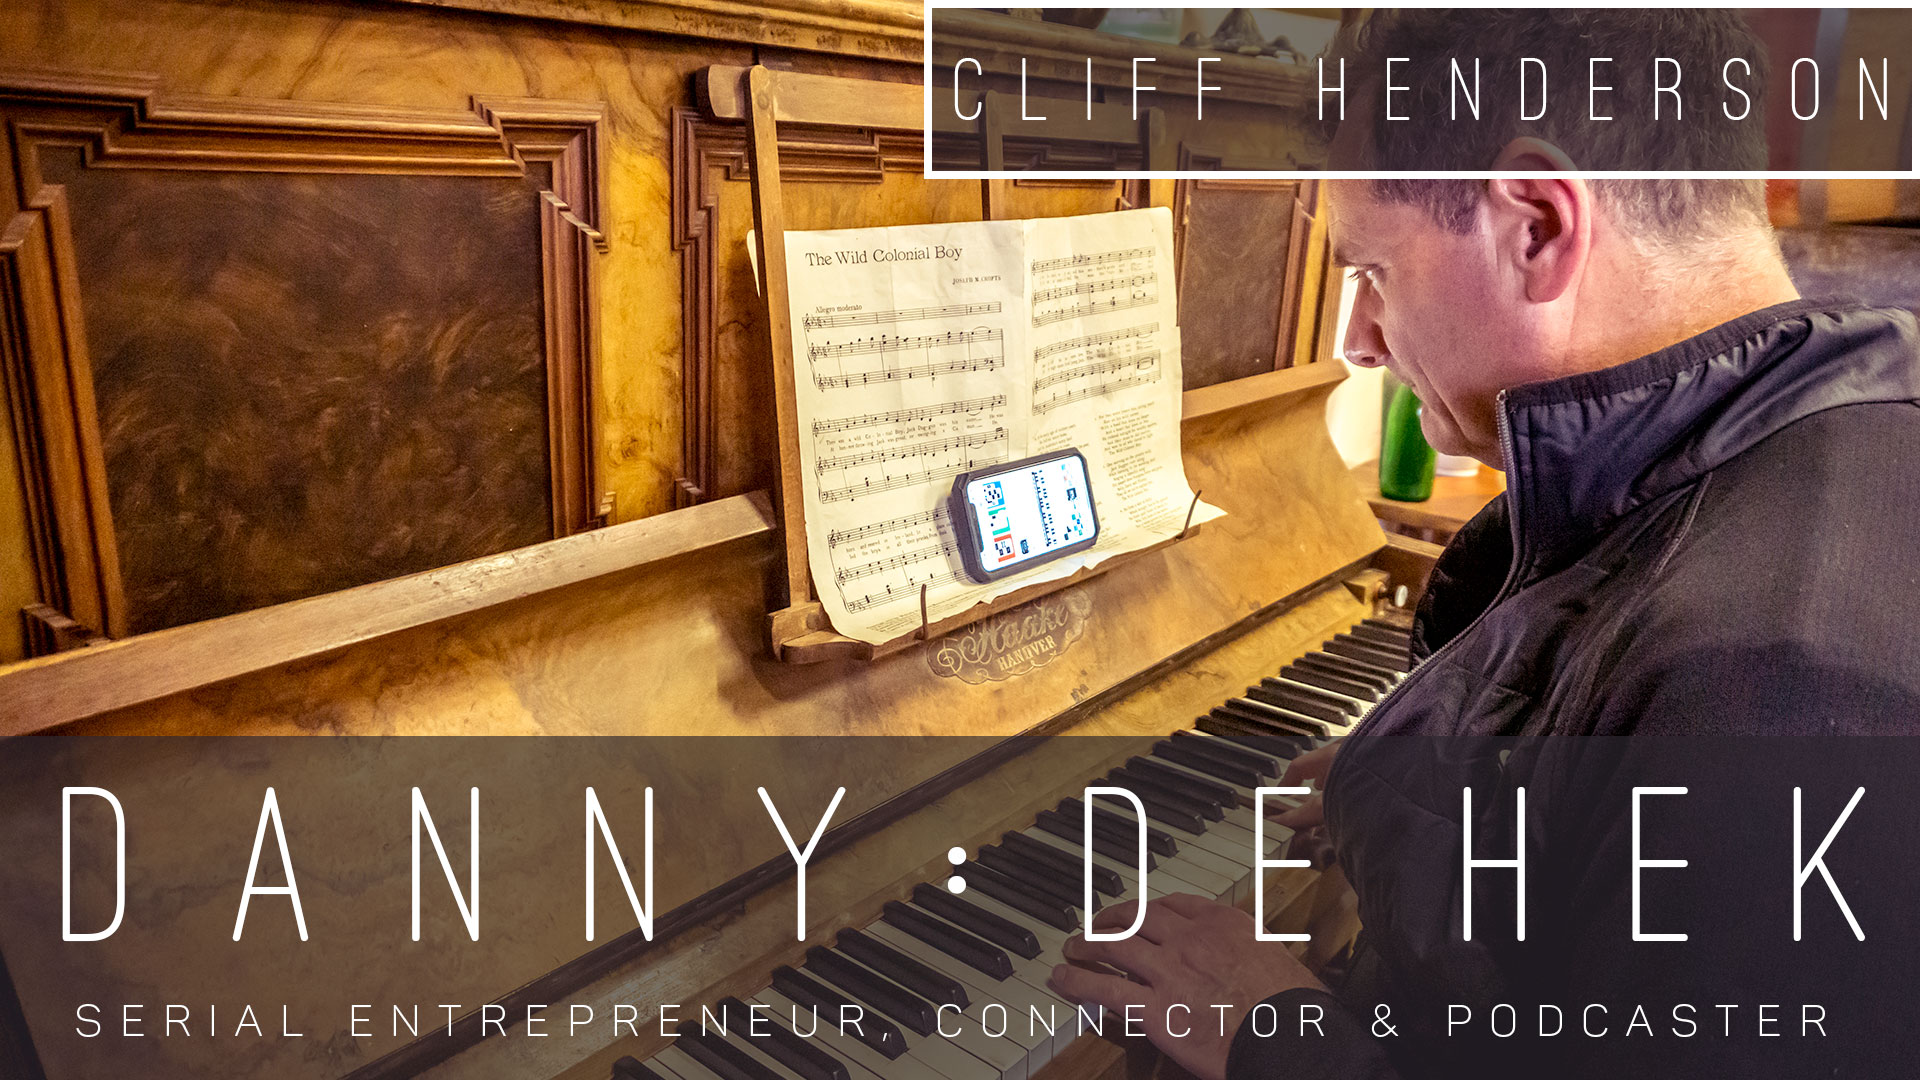 WHAT DE HEK Podcast 12 Questions with Ex Jehovahs Witness Cliff Fifth Henderson Rapper Entrepreneur Decision Maker Connector Podcaster Educator